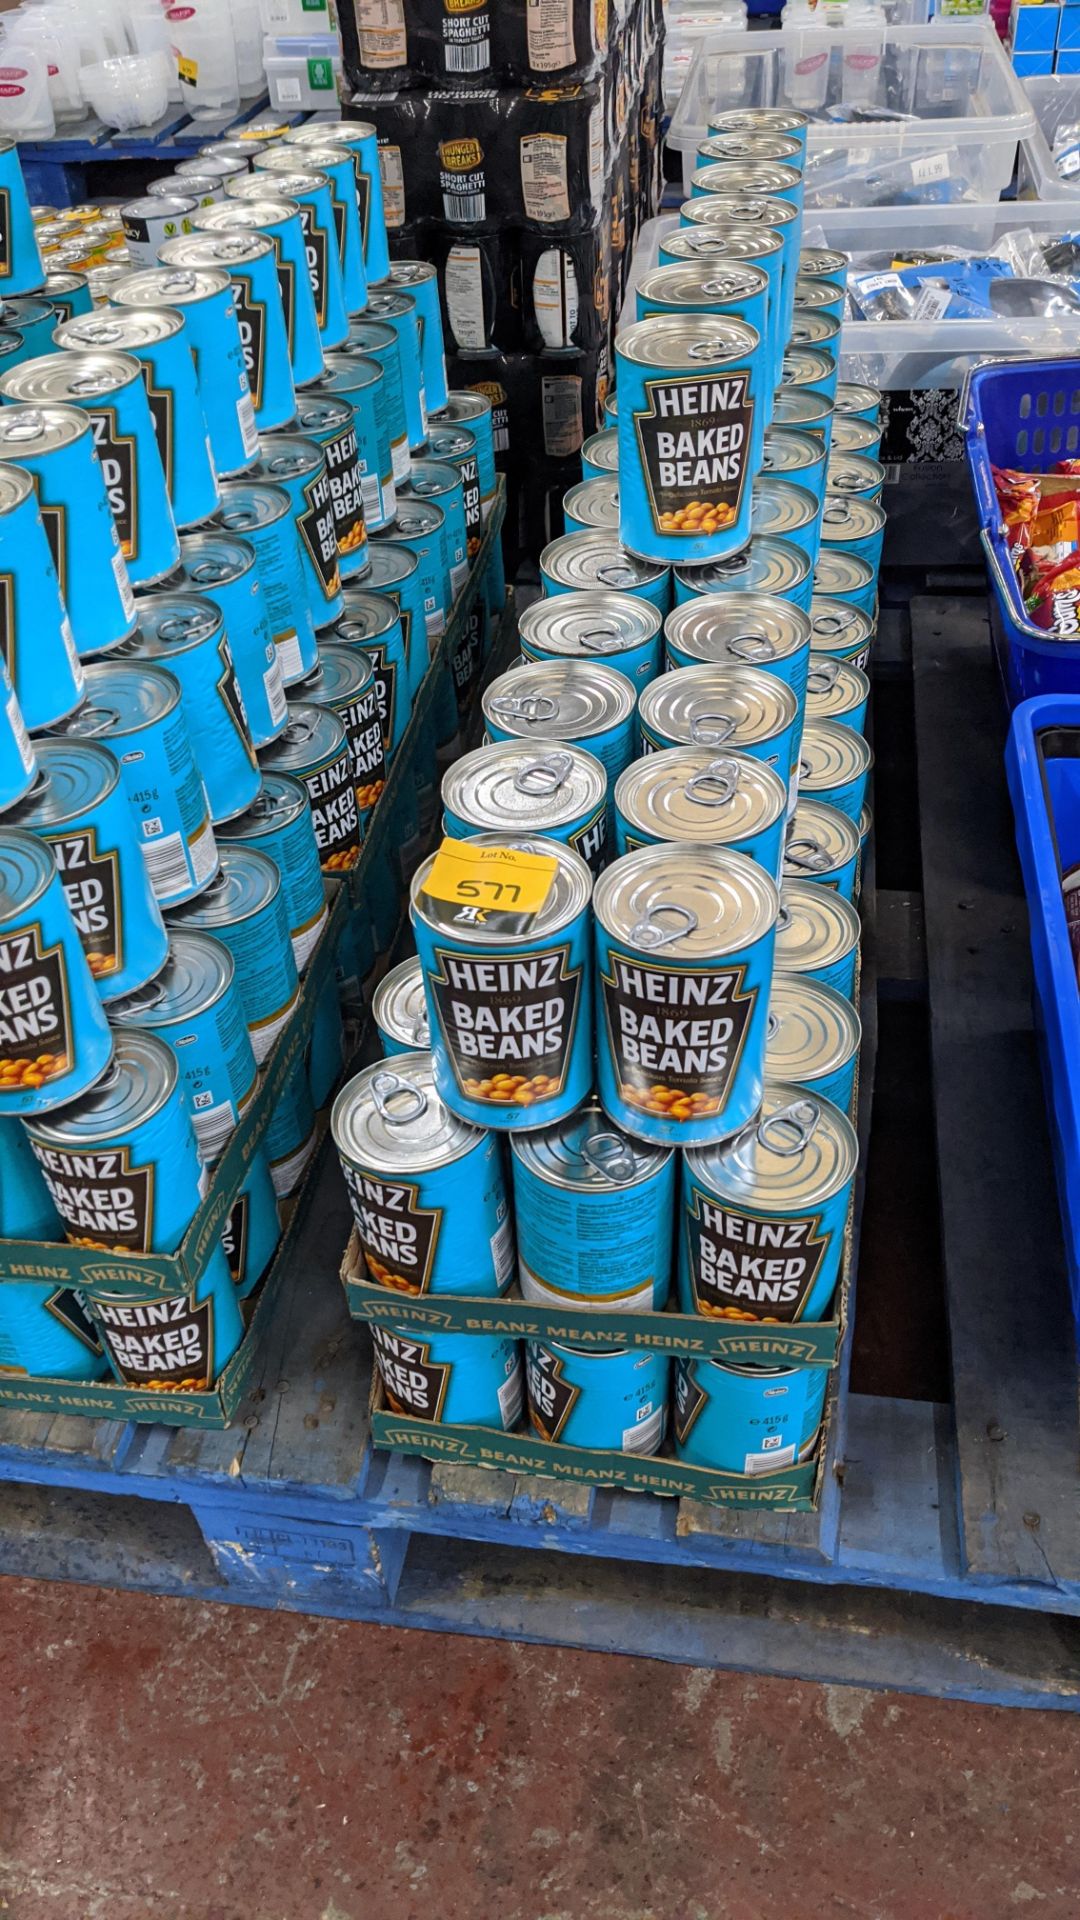 103 off 415g tins of Heinz Baked Beans. IMPORTANT – DO NOT BID BEFORE READING THE IMPORTANT